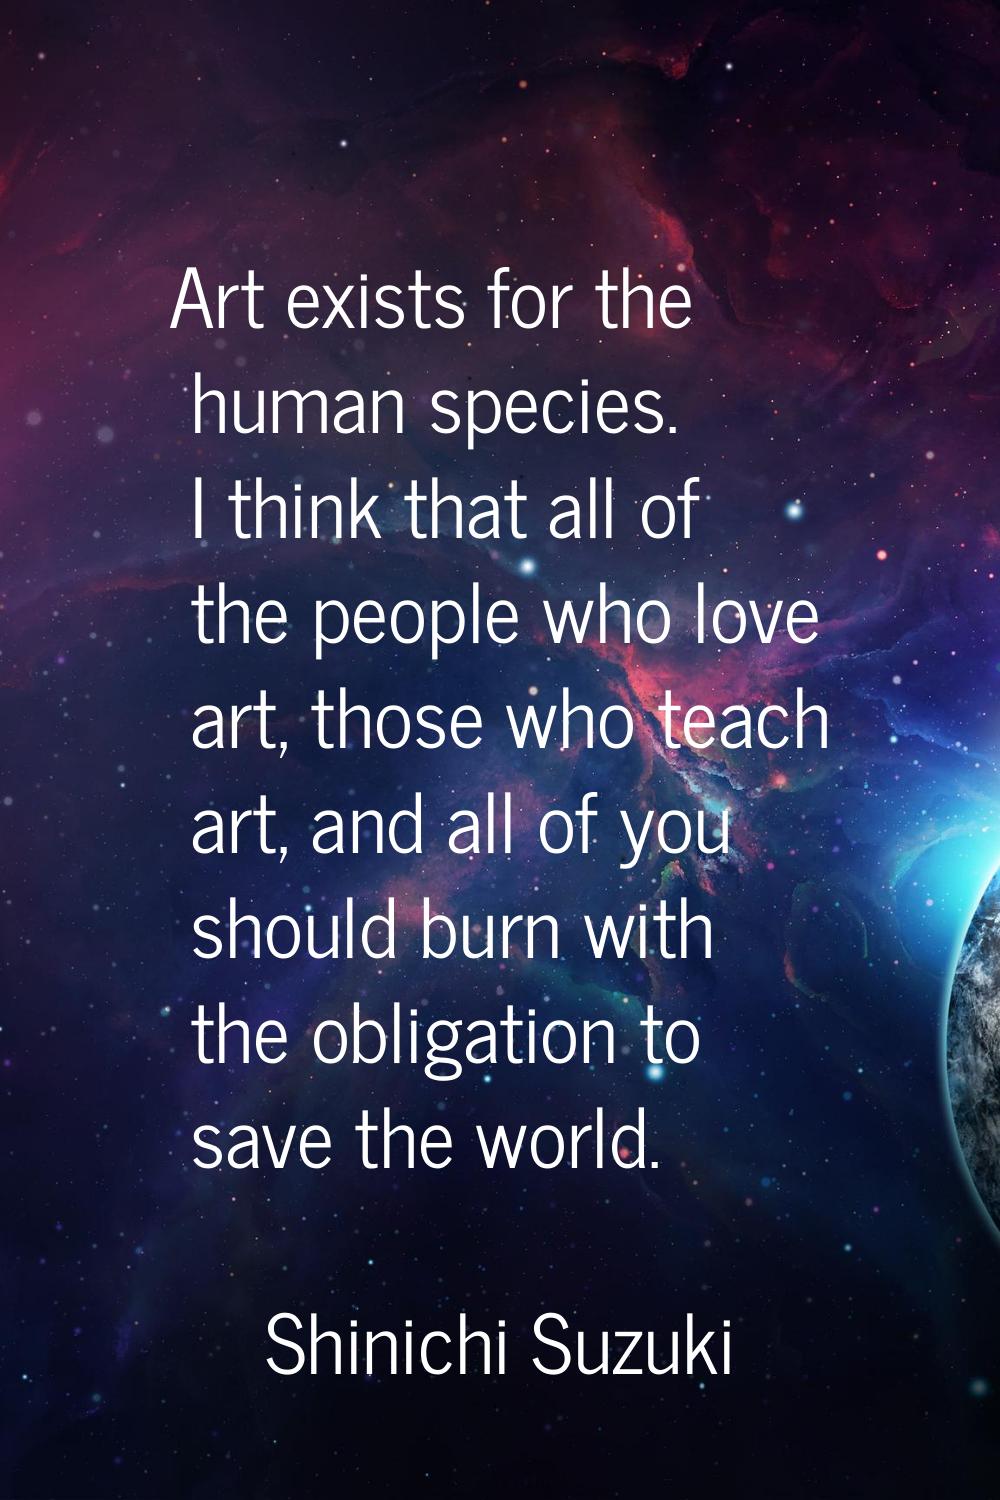 Art exists for the human species. I think that all of the people who love art, those who teach art,